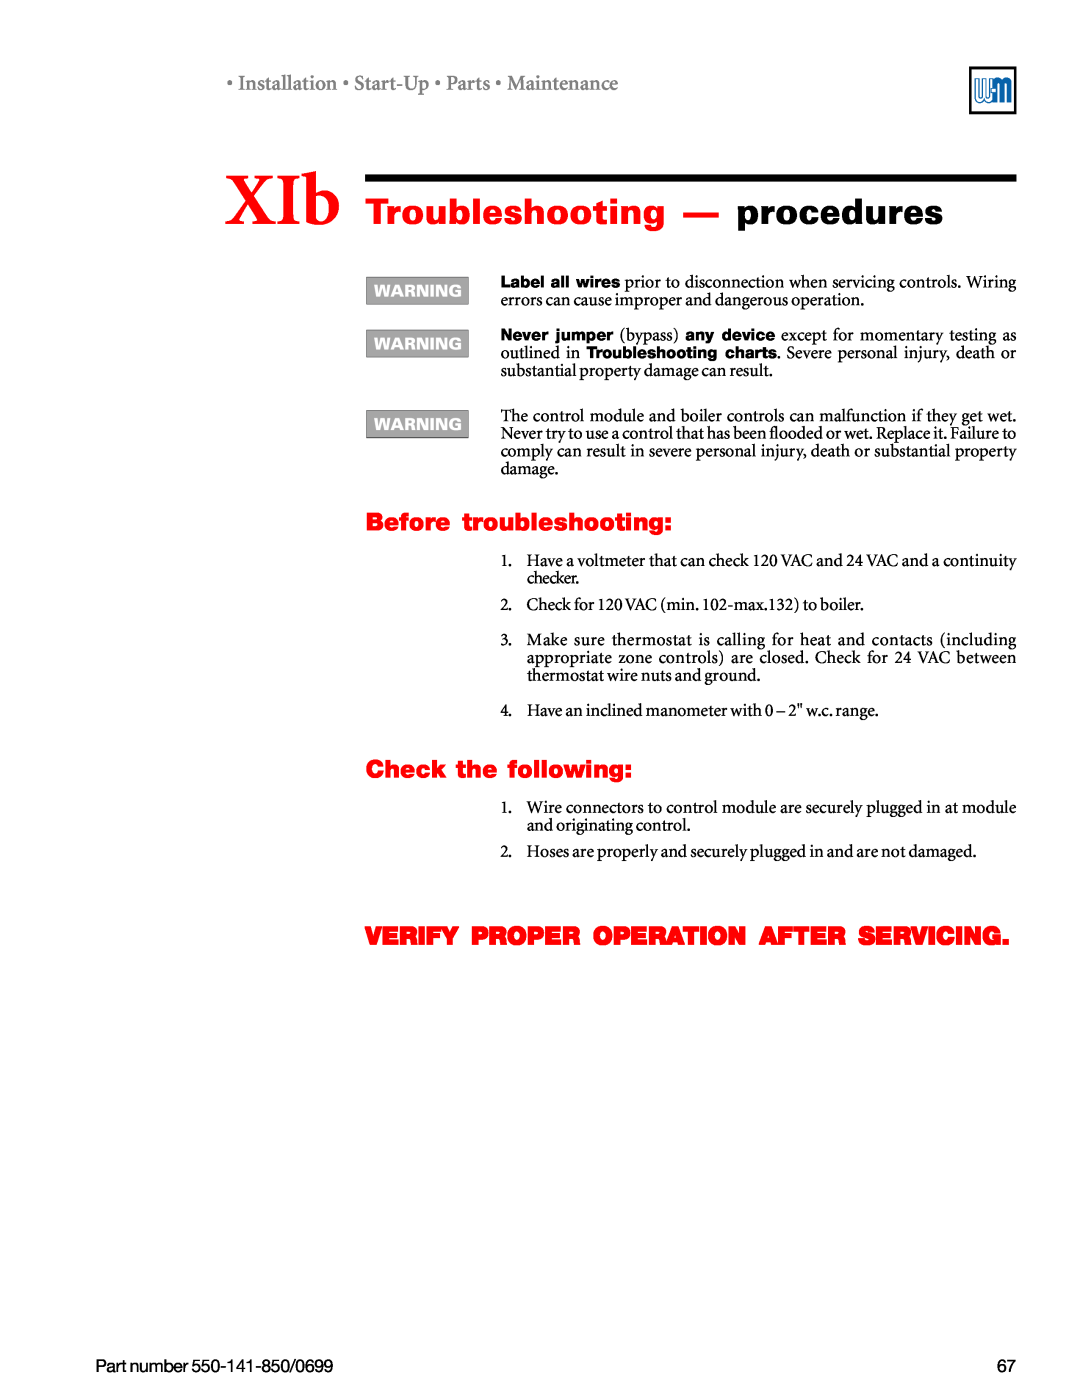 Weil-McLain 550-141-850/0599 manual XIb Troubleshooting - procedures, Before troubleshooting, Check the following 